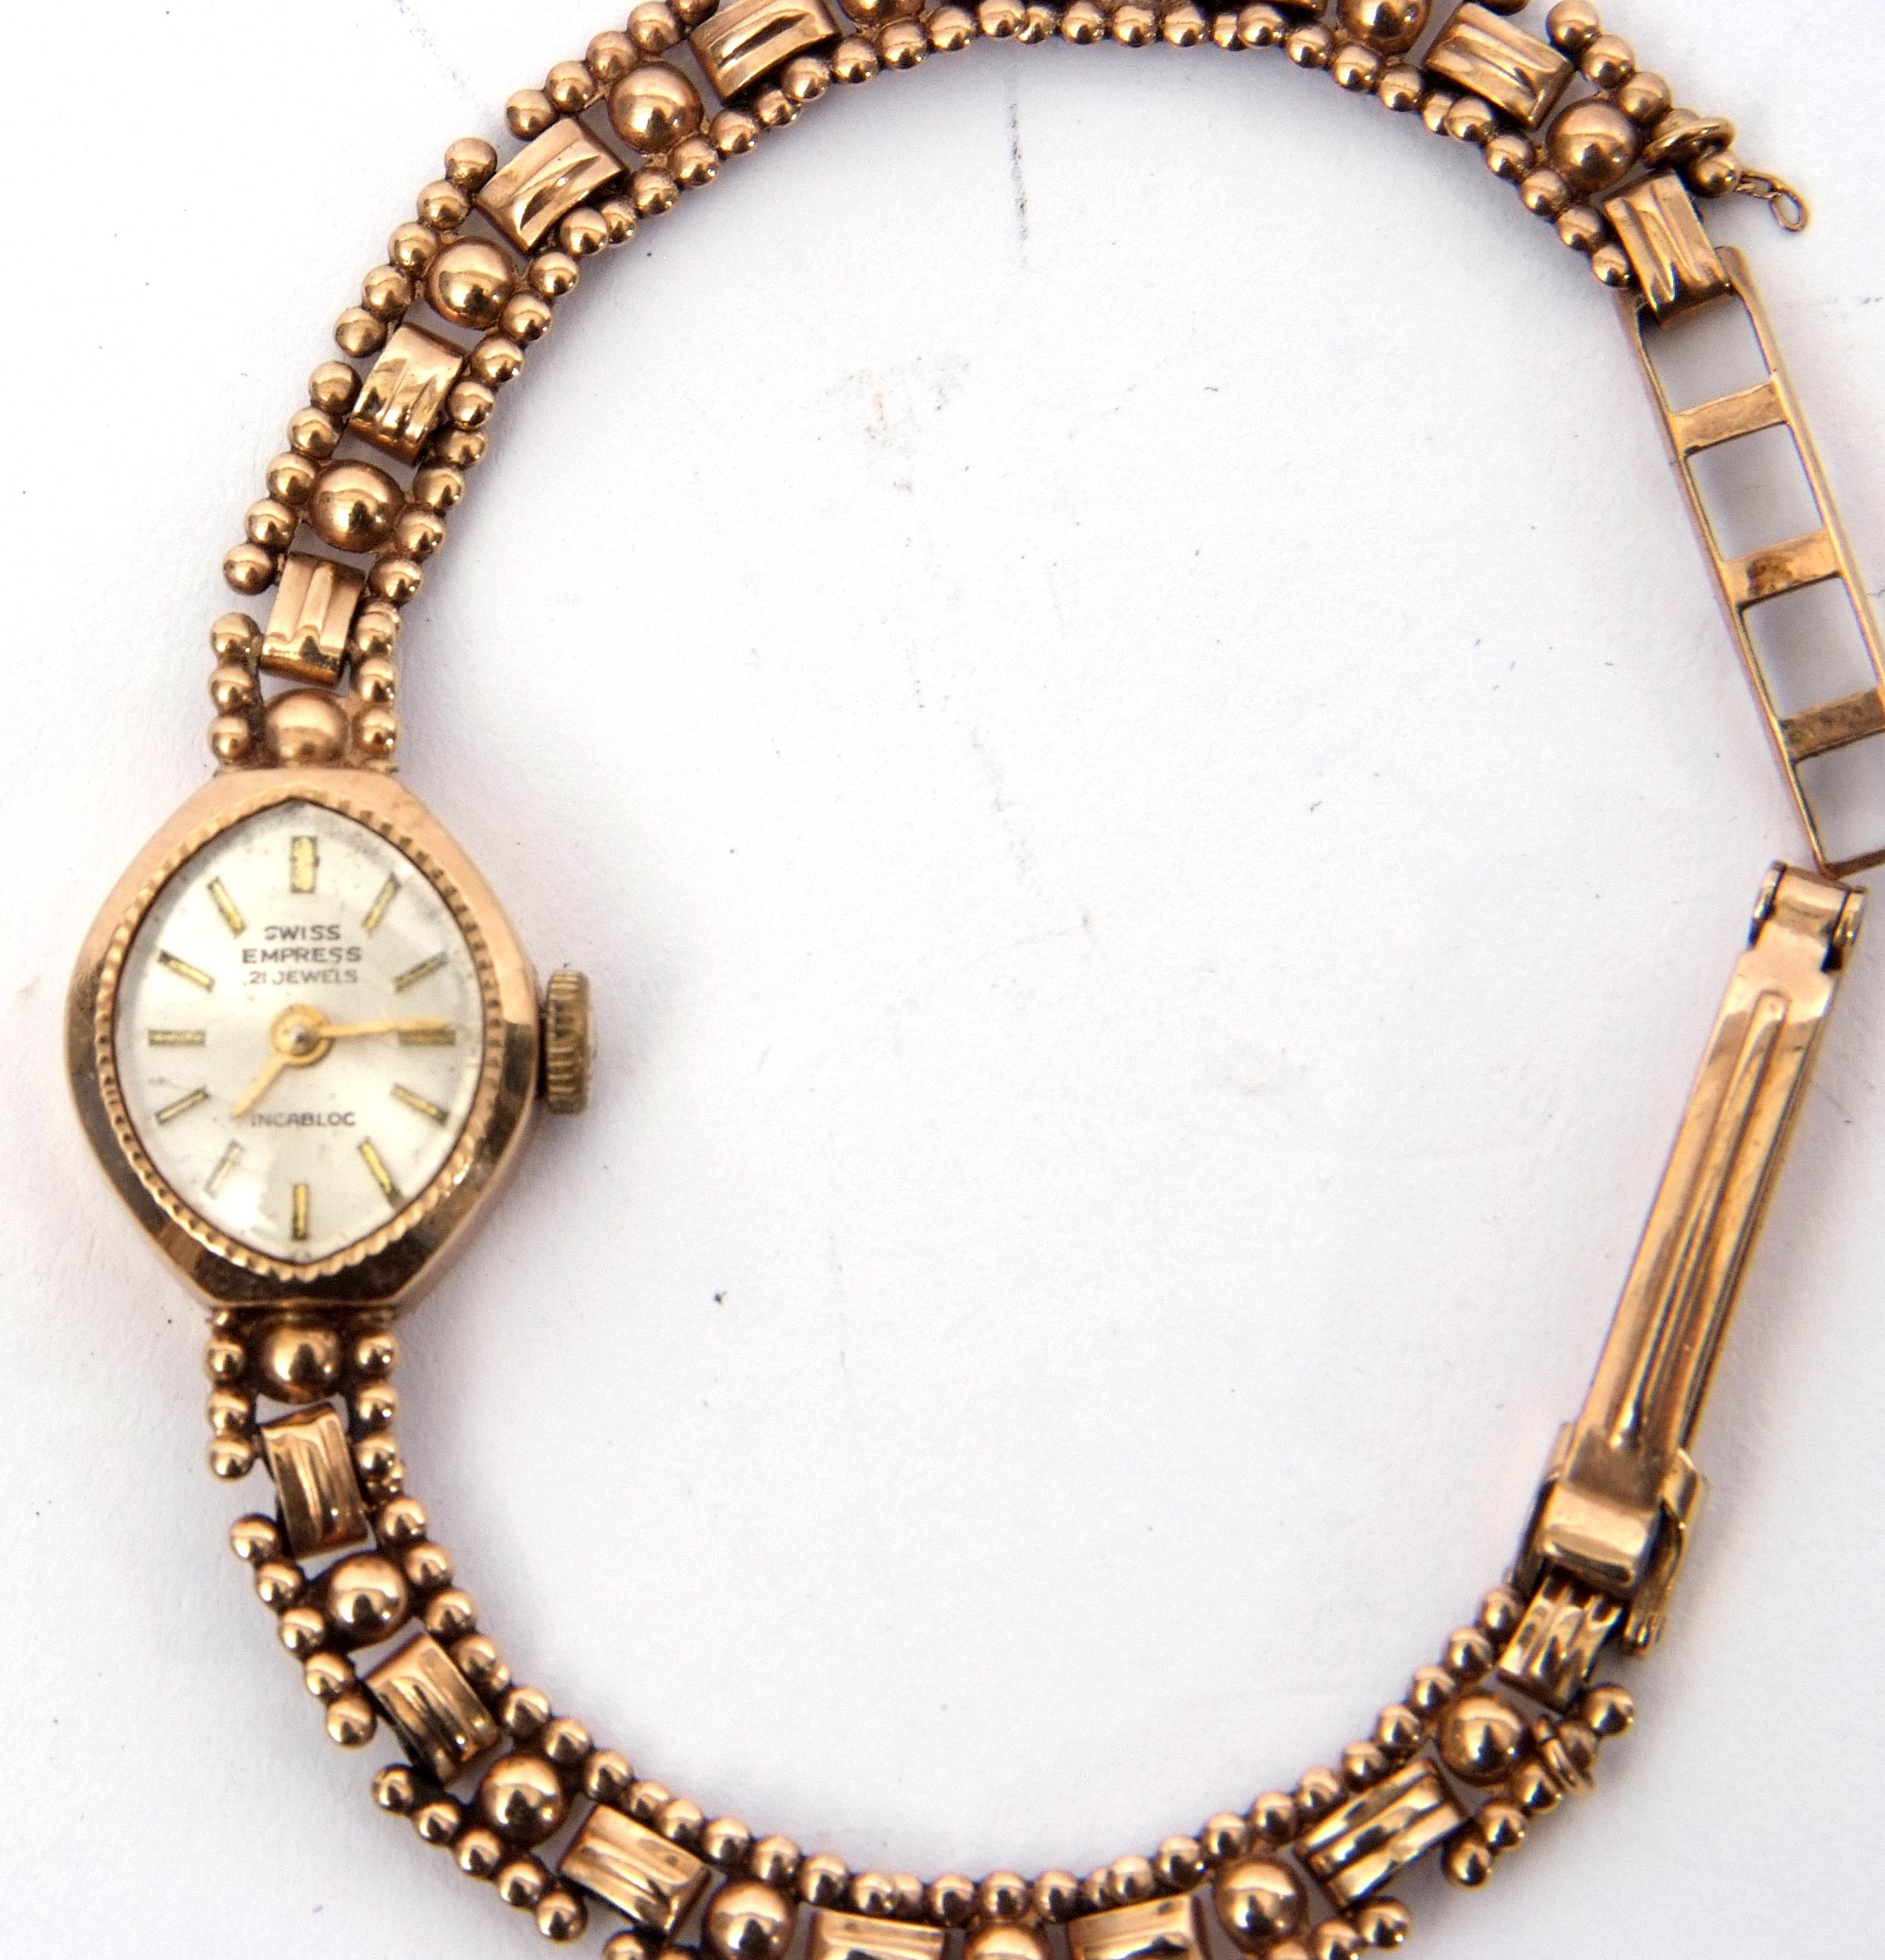 Ladies 9ct gold cased "Swiss Empress" cocktail watch, mounted on a hallmarked 9ct gold fancy link - Image 2 of 2